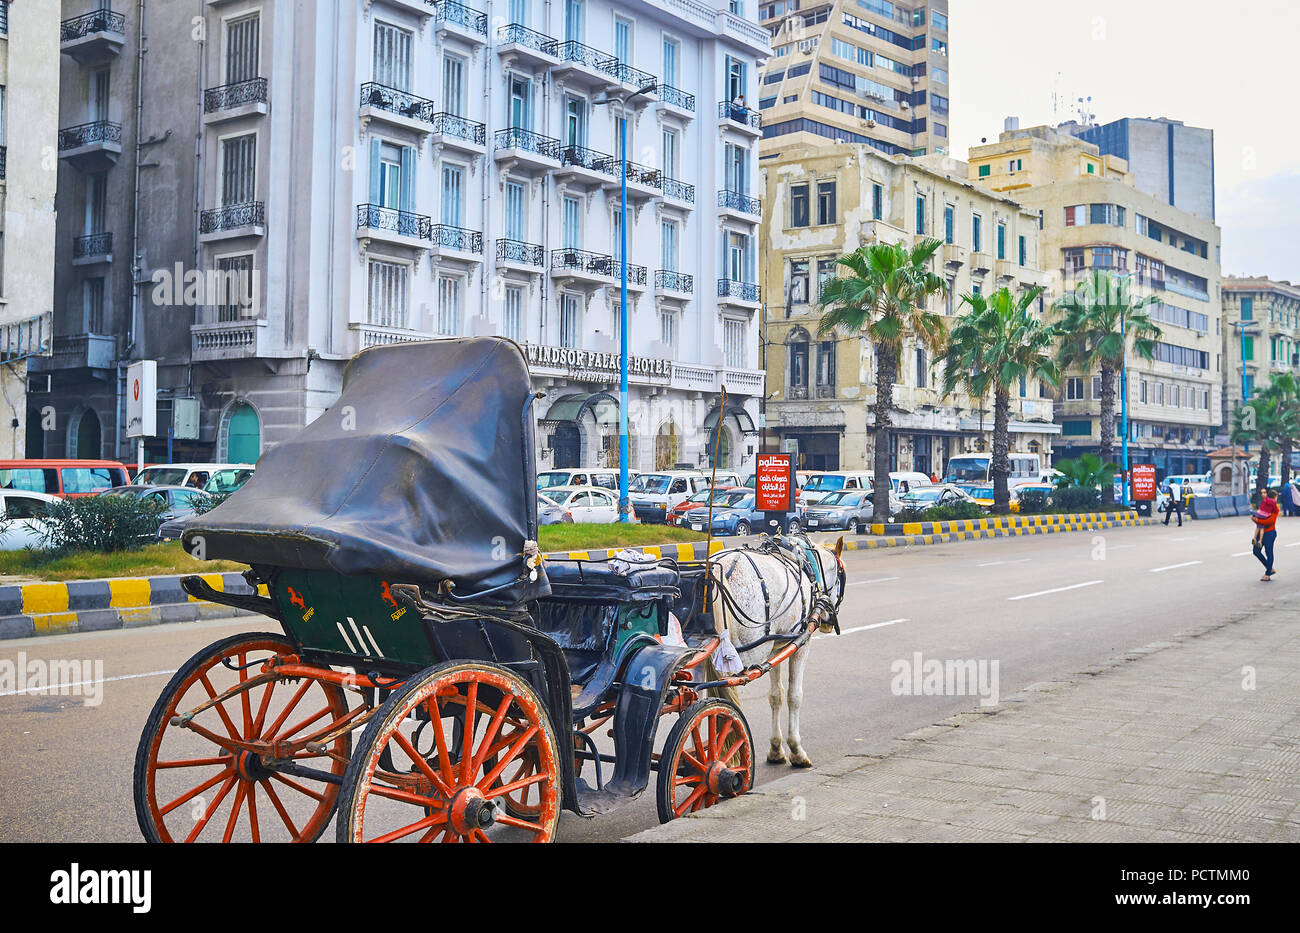 ALEXANDRIA, EGYPT - DECEMBER 18, 2017: The old-fashioned horse-drawn carriage are still popular tourist transport in city, the rides along Corniche Av Stock Photo